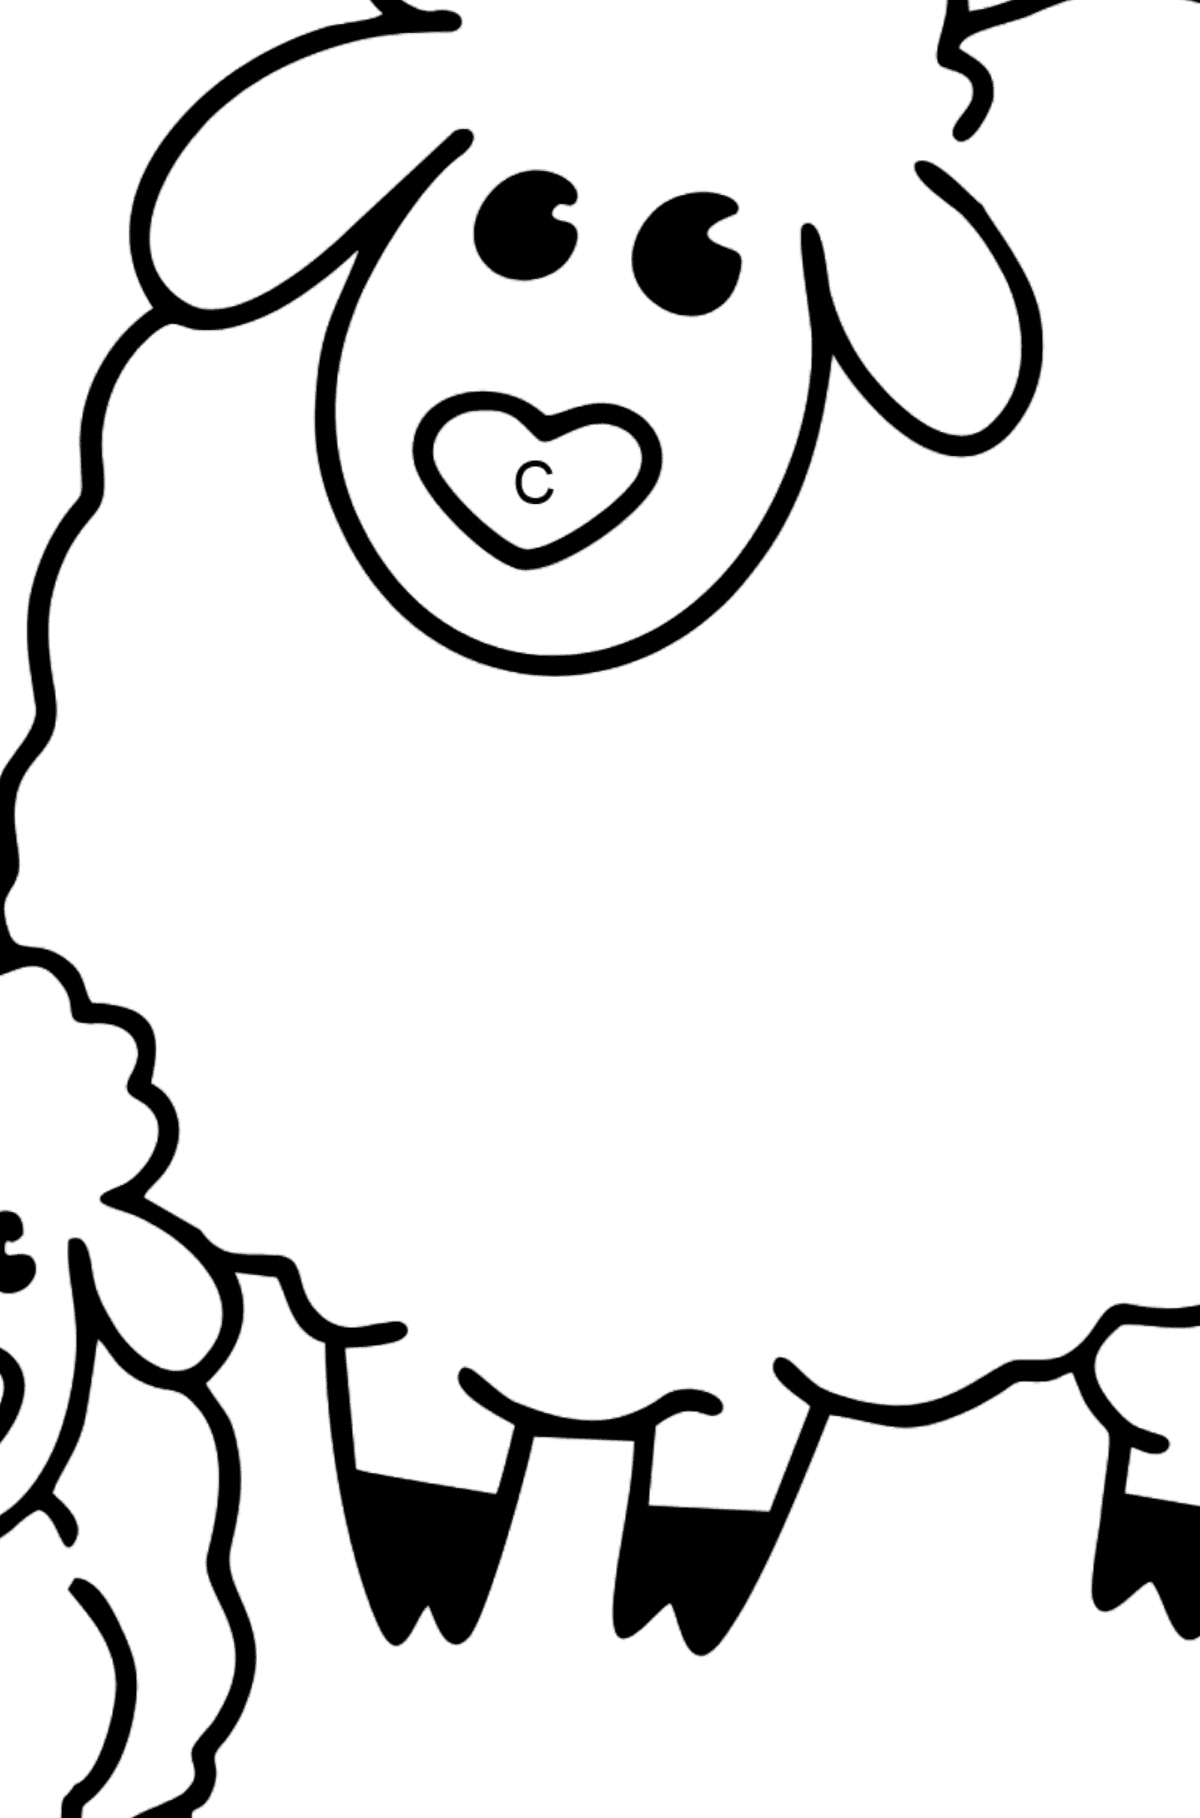 Sheep with Lamb coloring page - Coloring by Letters for Kids